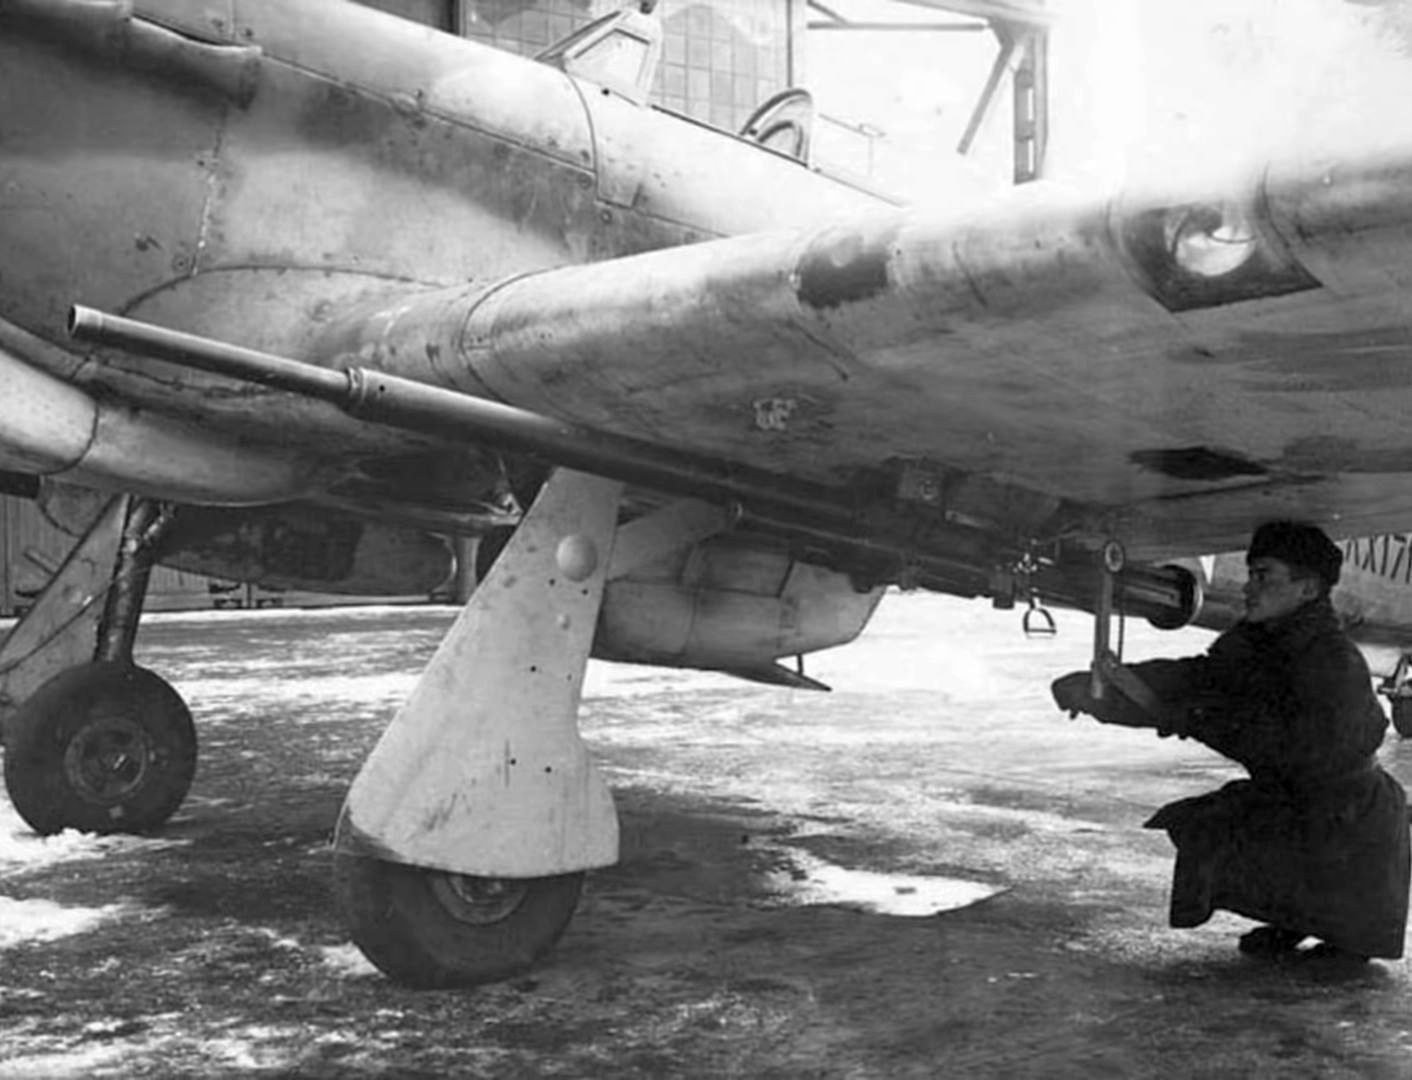 Hawker Hurricane Mk.IID with 40mm Vickers S cannon, USSR 1942/43